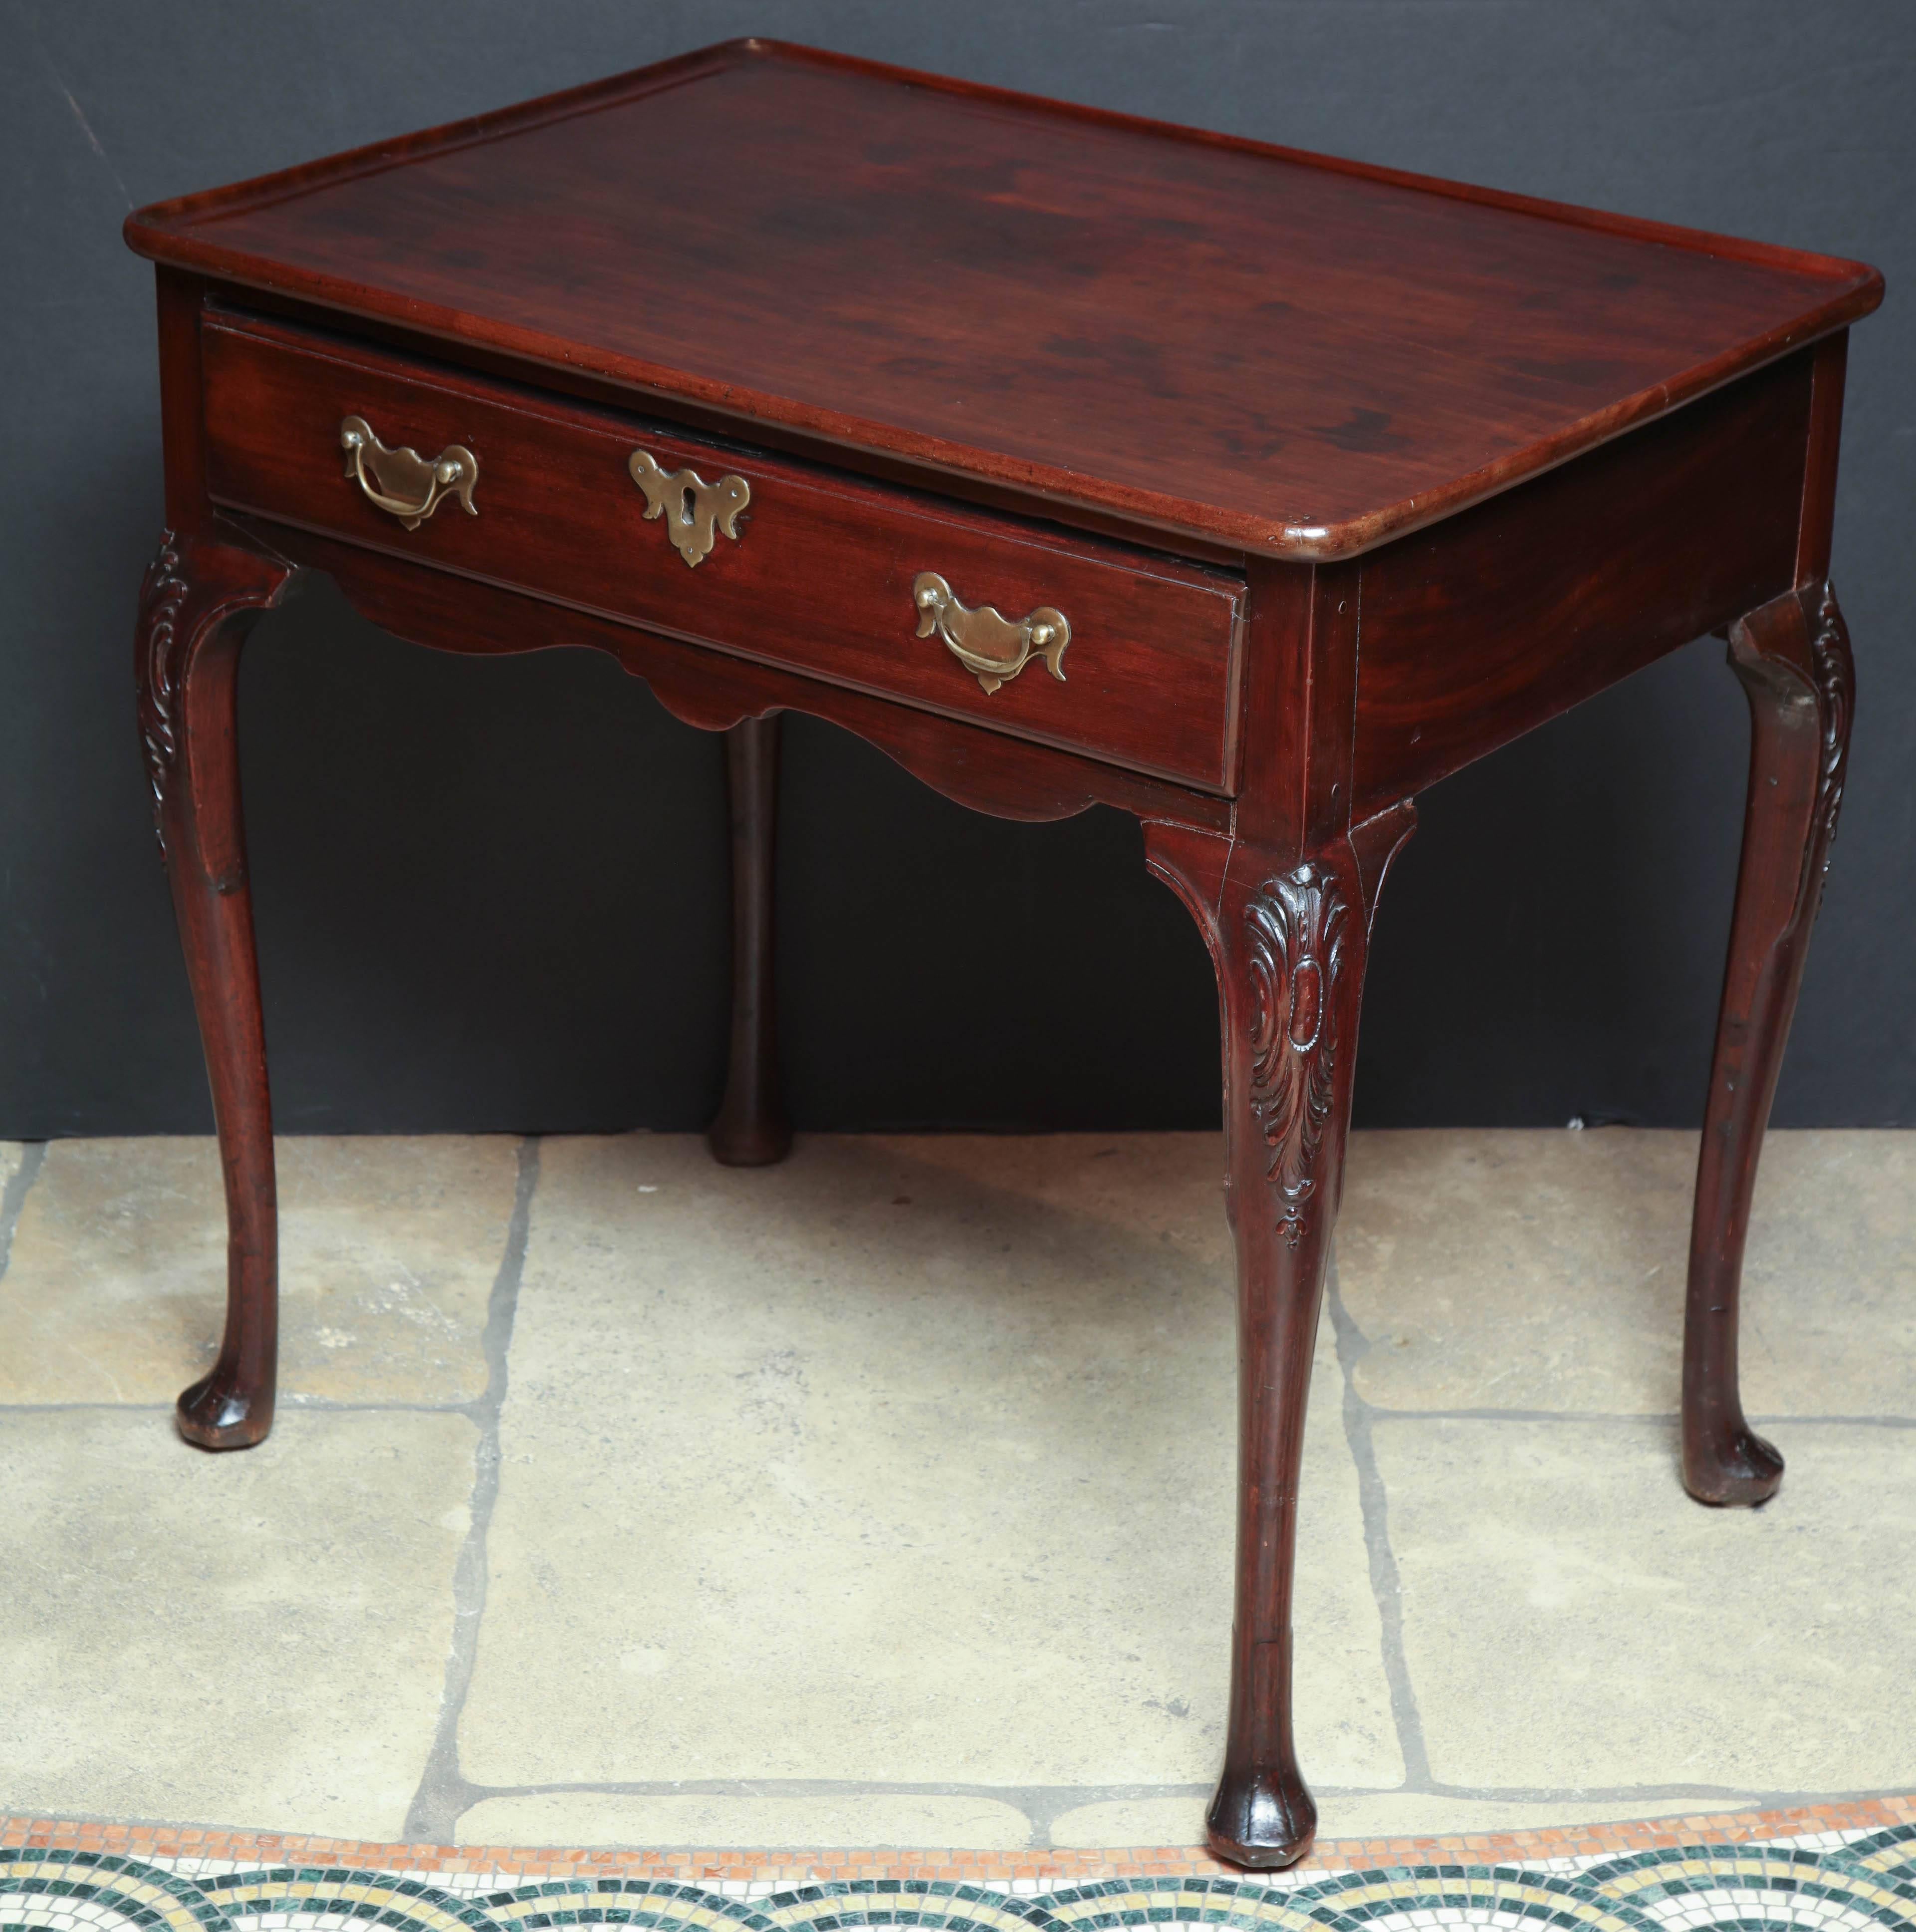 A rare Irish Queen Anne mahogany tray top tea table with long drawer, original hardware, peanut and leaf carved knees on trifid feet.